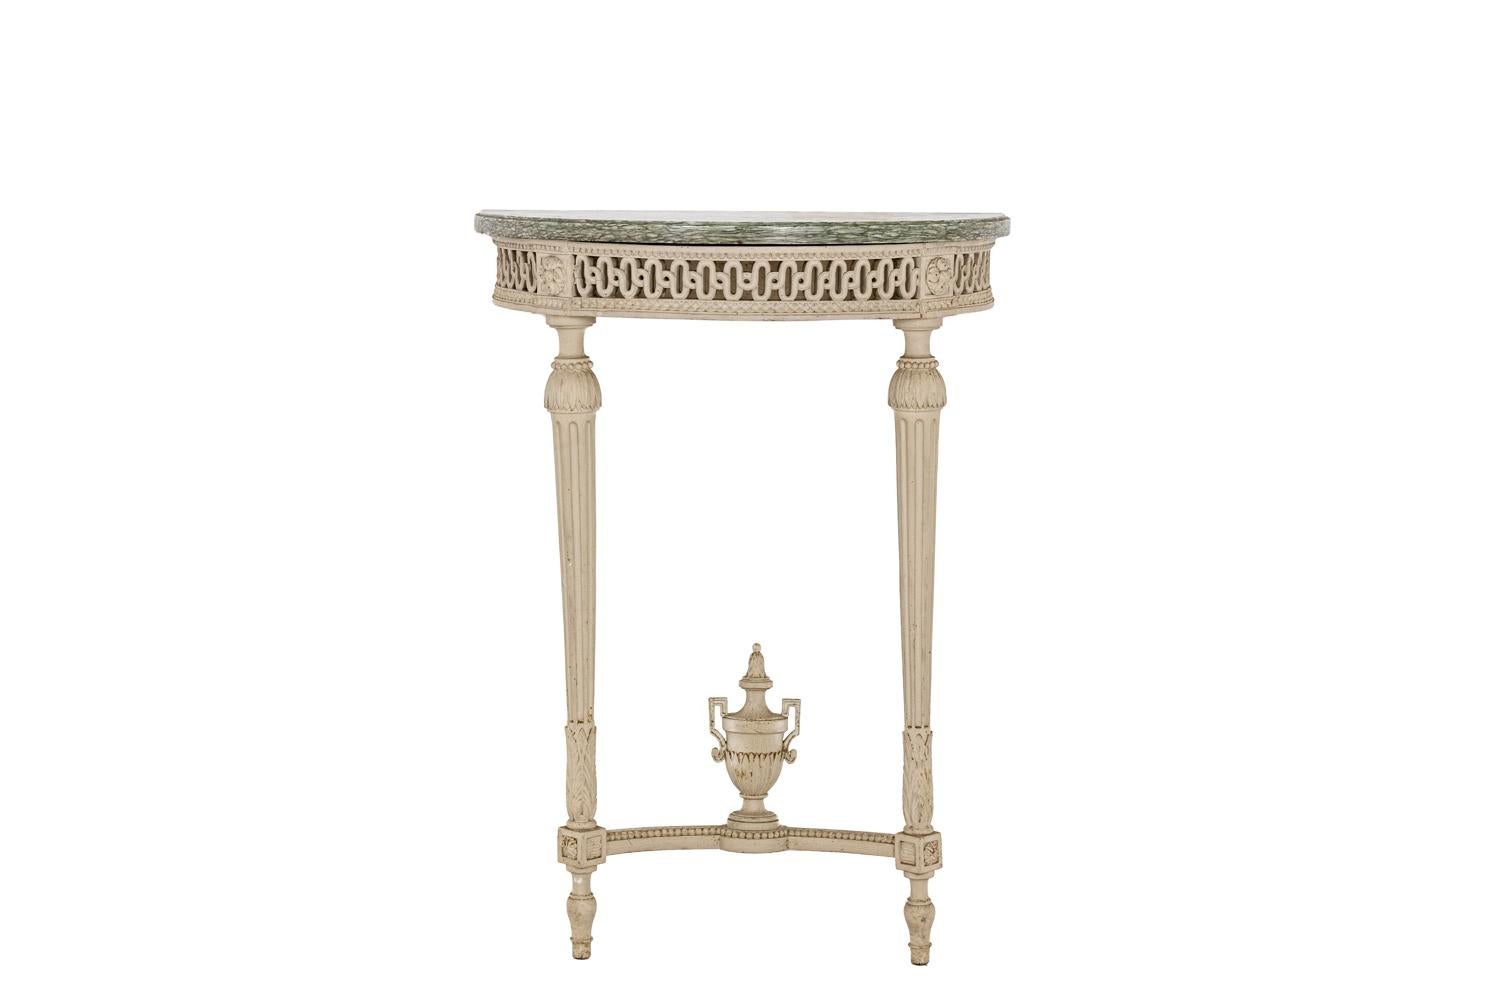 Half-moon console in gray lacquered wood - lacquered and carved crosspieces with an openwork interlacing pattern - pearl friezes - fluted and tapered feet joined by a spacer decorated with a fire pot - spinning top feet - rosettes in the connection